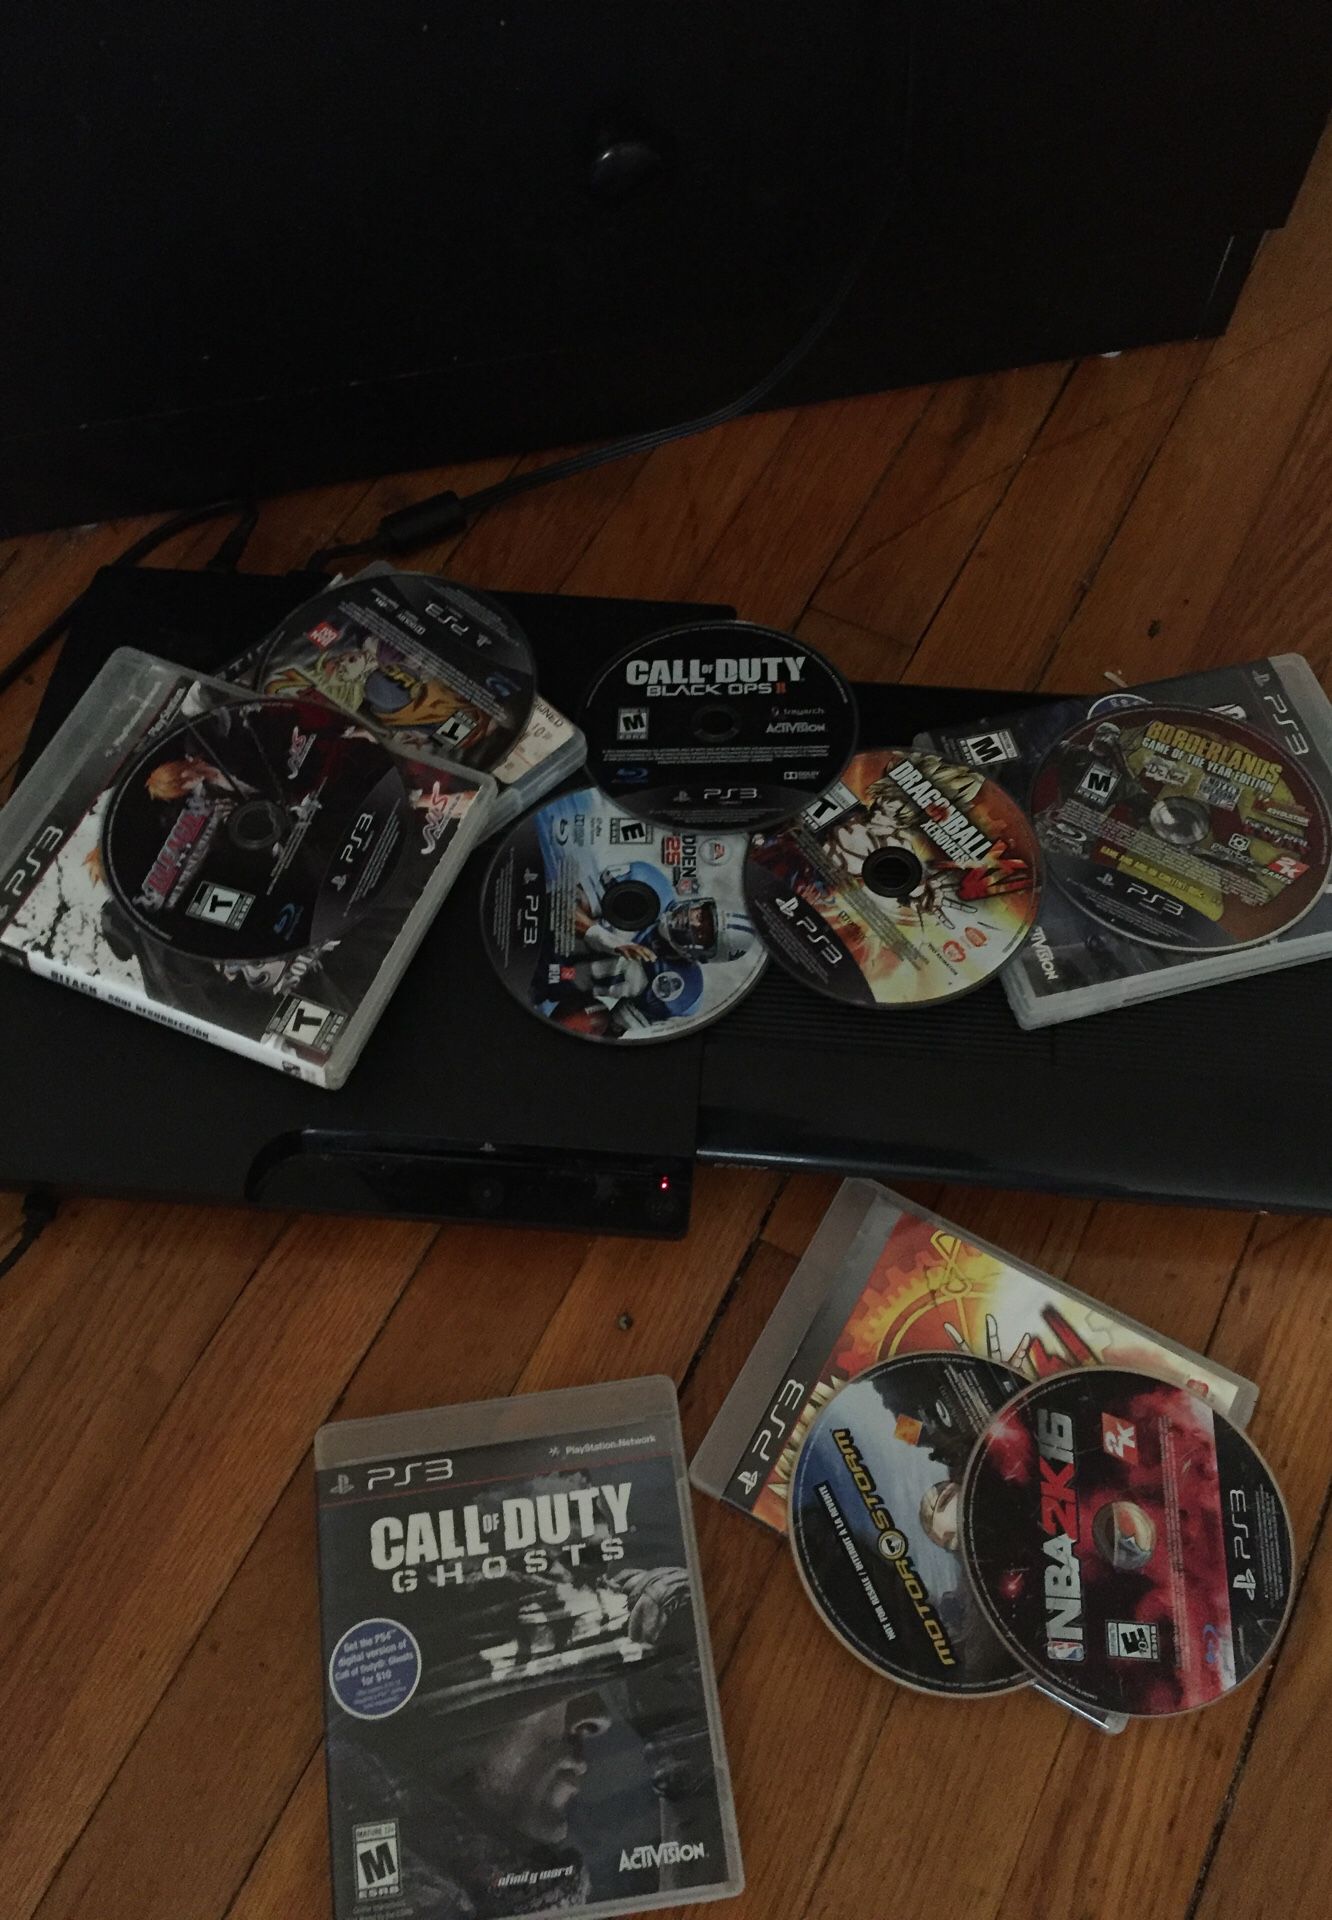 2 Ps3 with 8 games they in perfect condition i dont want them anymore